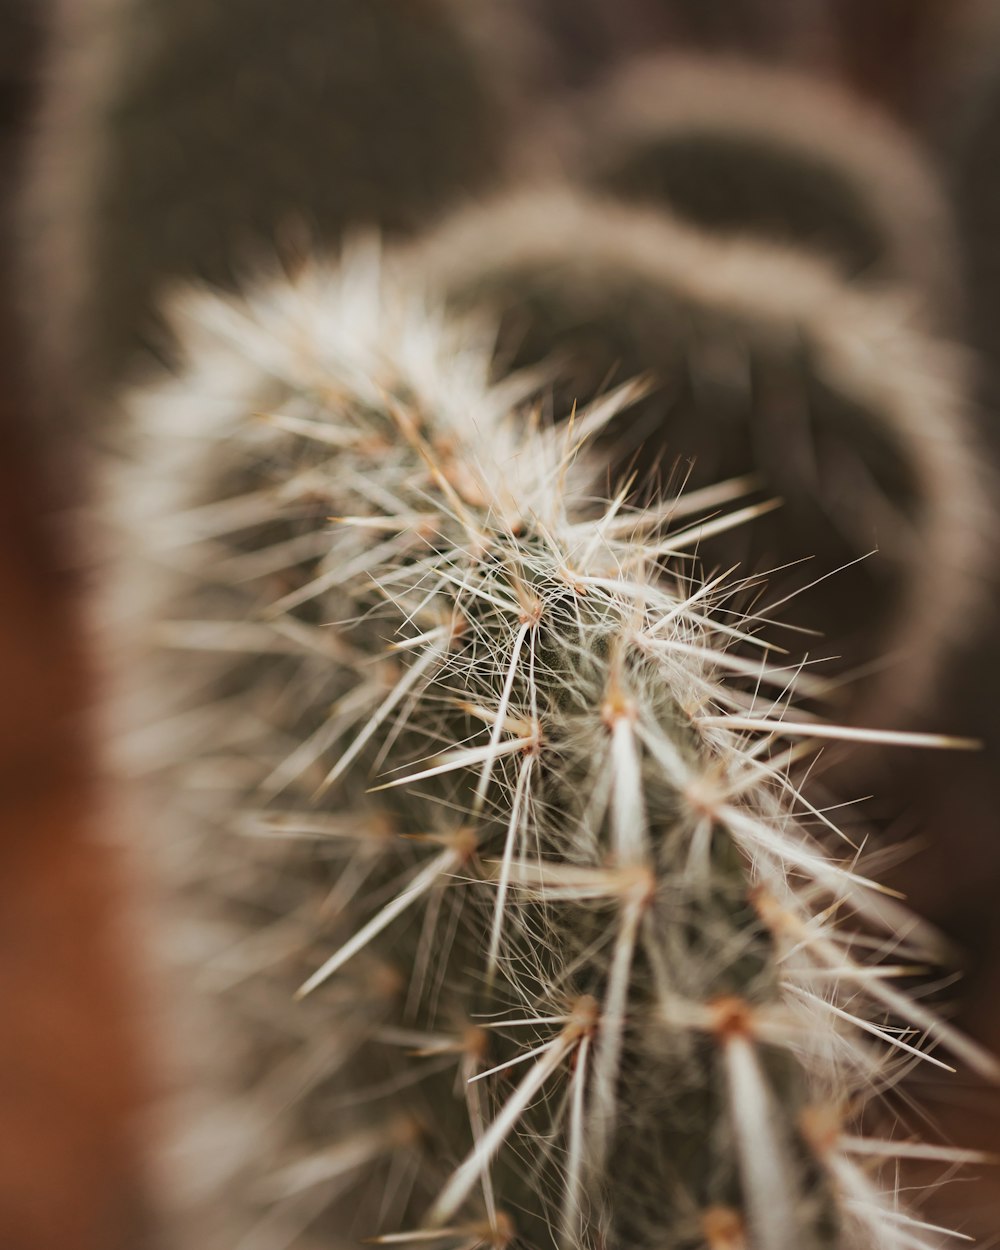 a close up of a cactus plant with long needles